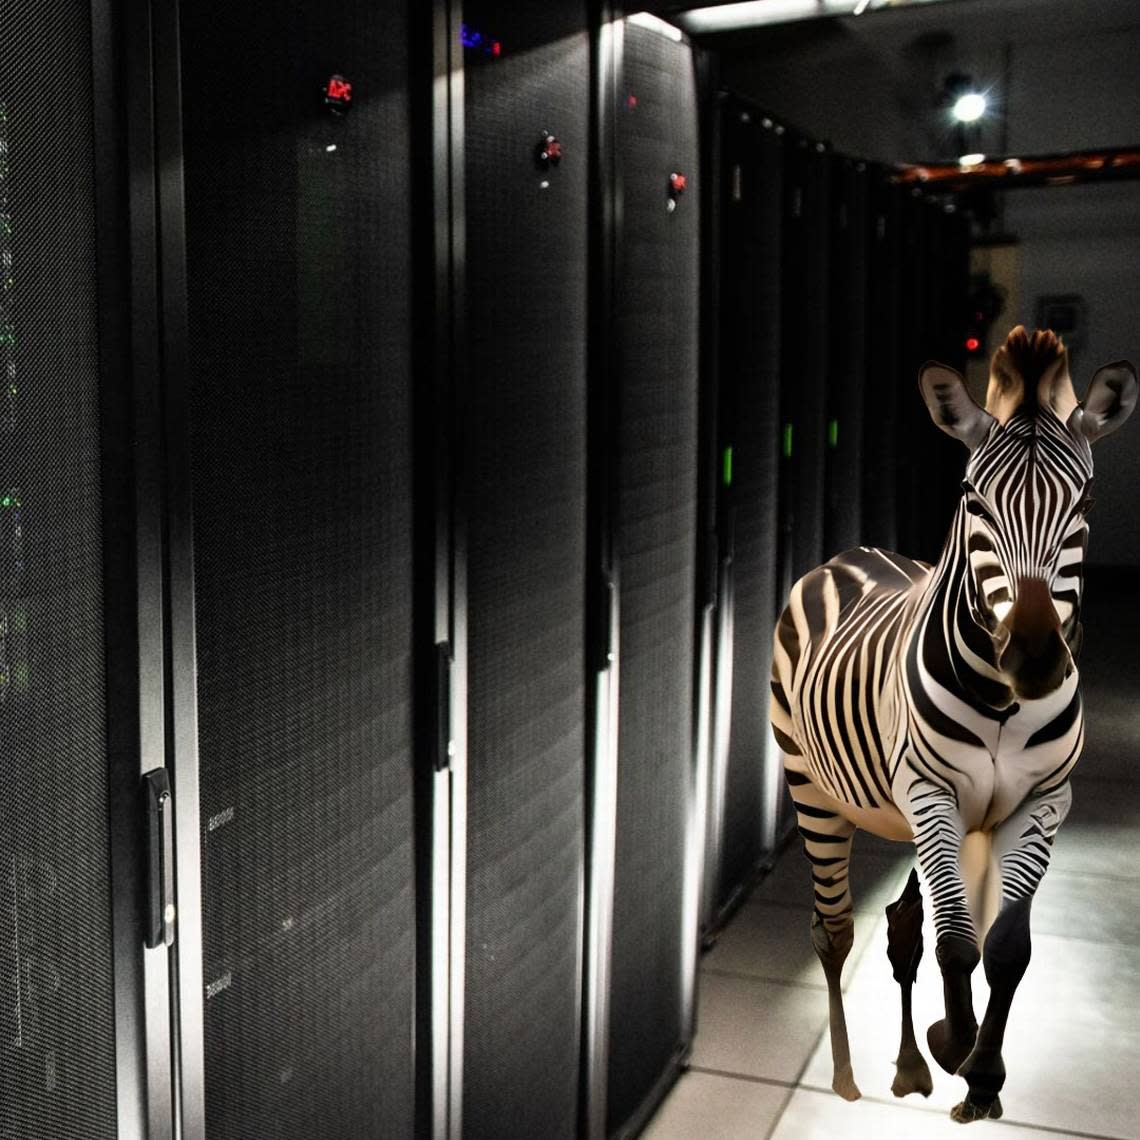 The runaway Zebra appears to have enjoyed the cool server room at PNNL’s Environmental Molecular Sciences Laboratory.